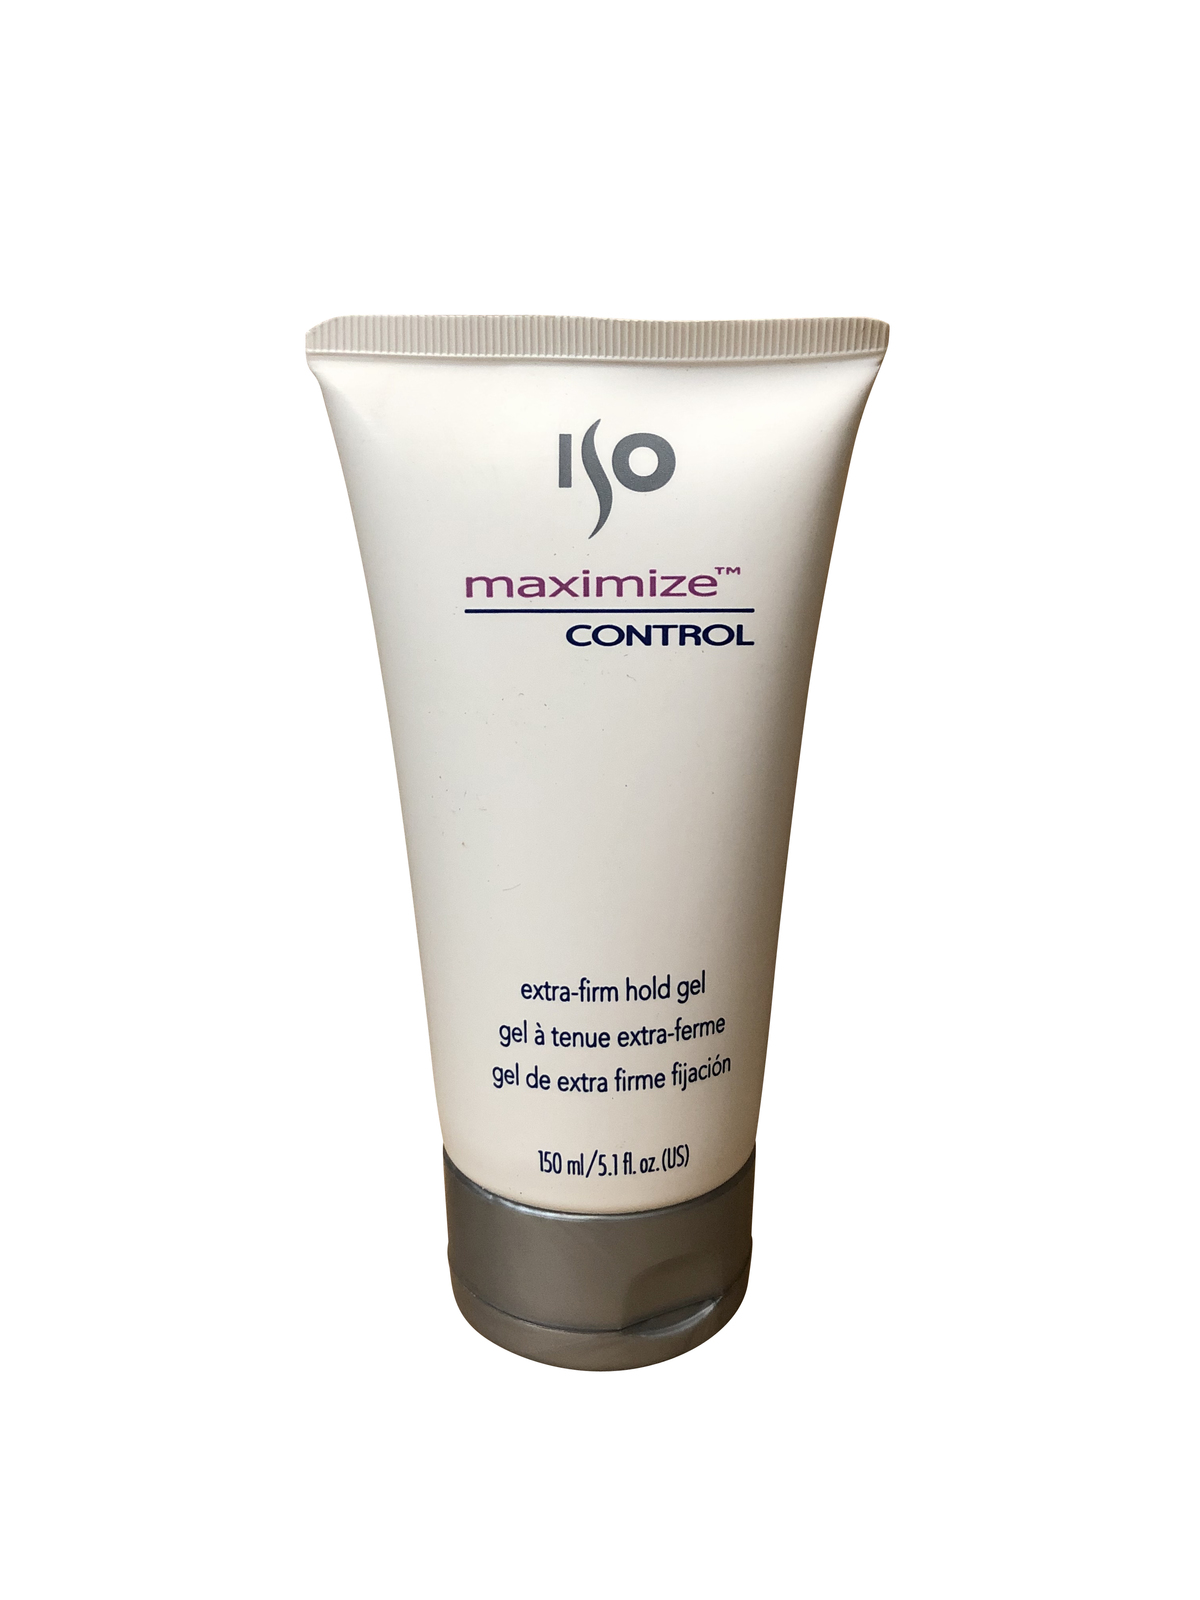 ISO Maximum Control Extra Firm Hold Gel 5.1 oz. - $9.26